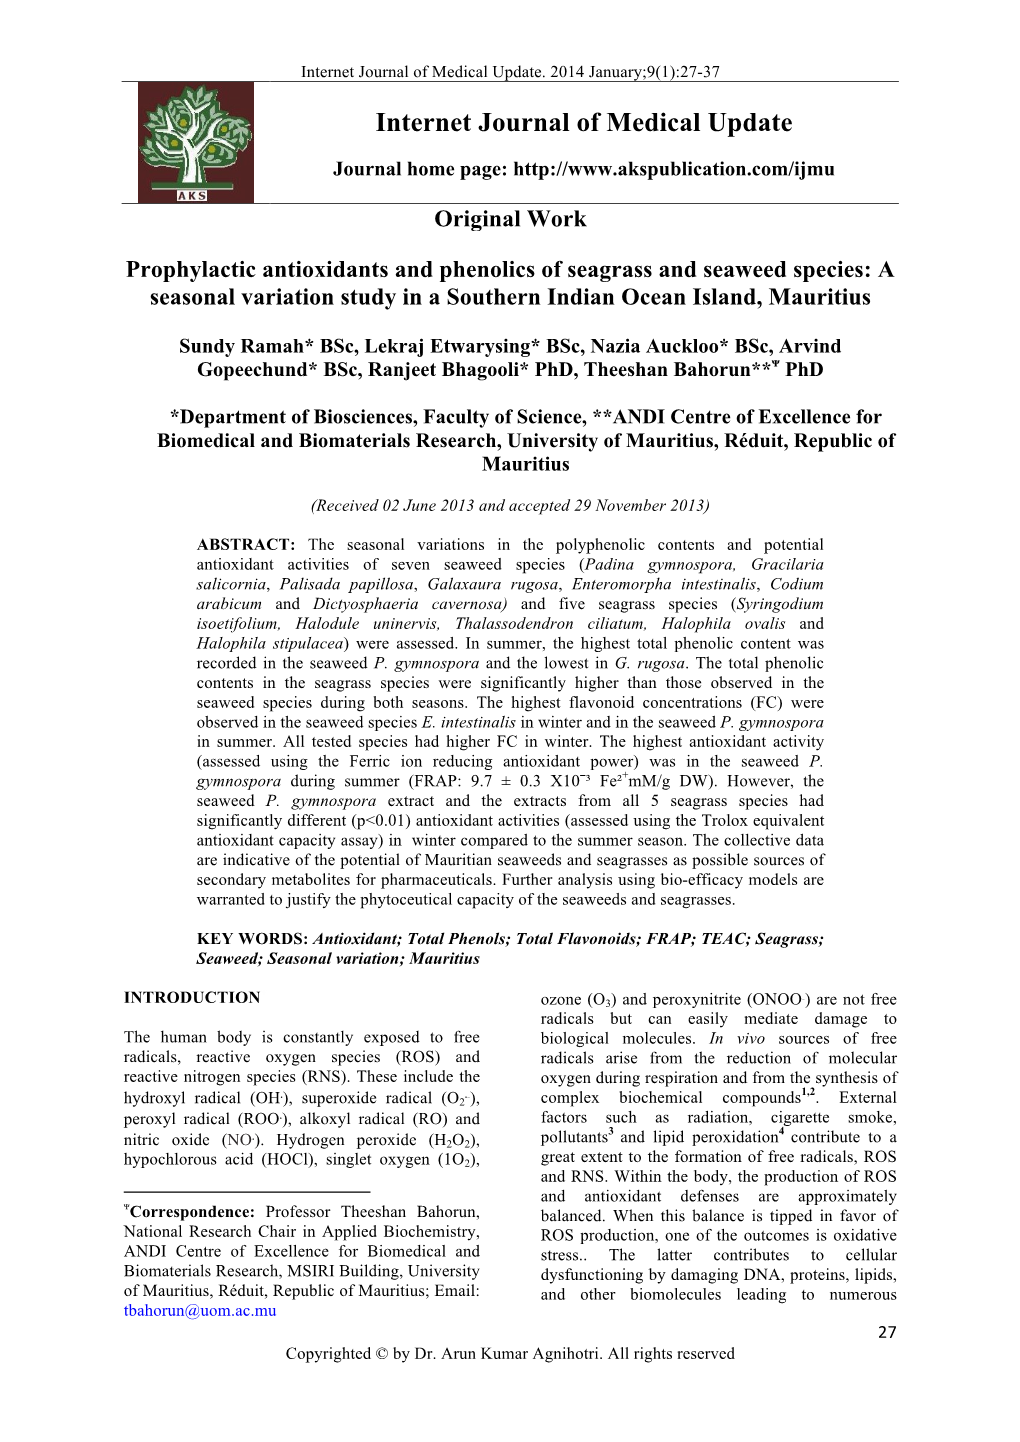 Prophylactic Antioxidants and Phenolics of Seagrass and Seaweed Species: a Seasonal Variation Study in a Southern Indian Ocean Island, Mauritius